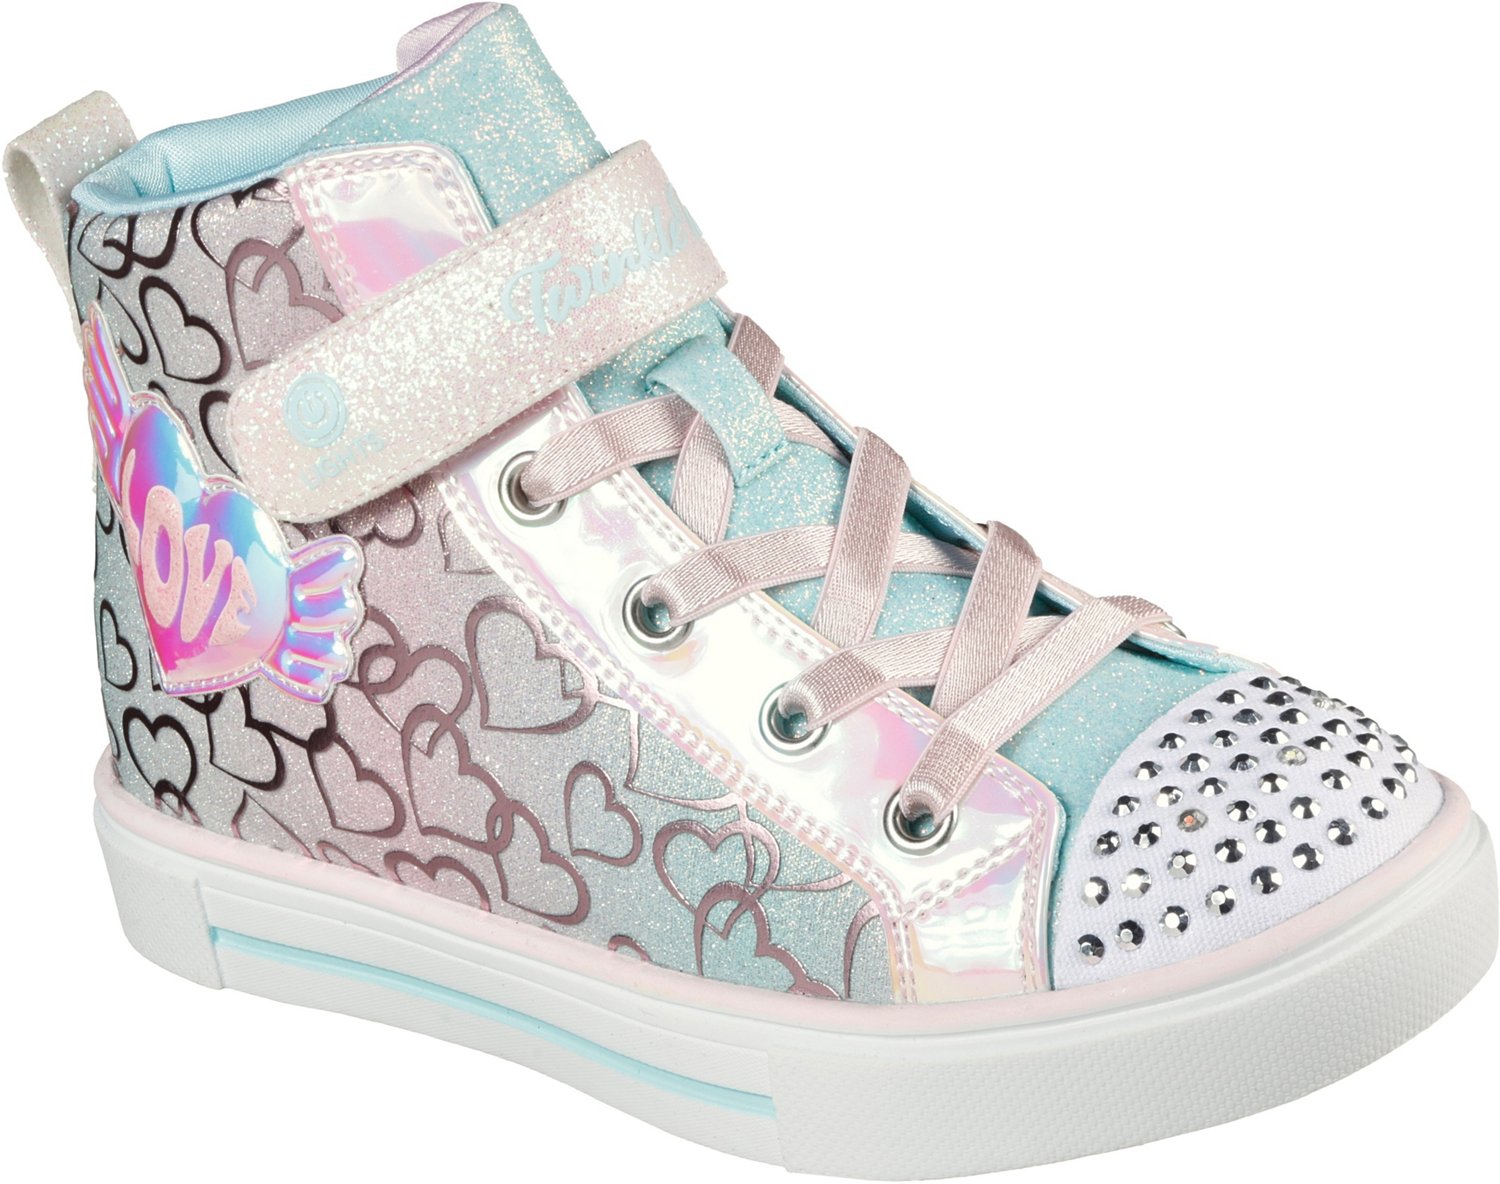 SKECHERS Girls' Toes Sparks Magic-Tastic Shoes | Academy